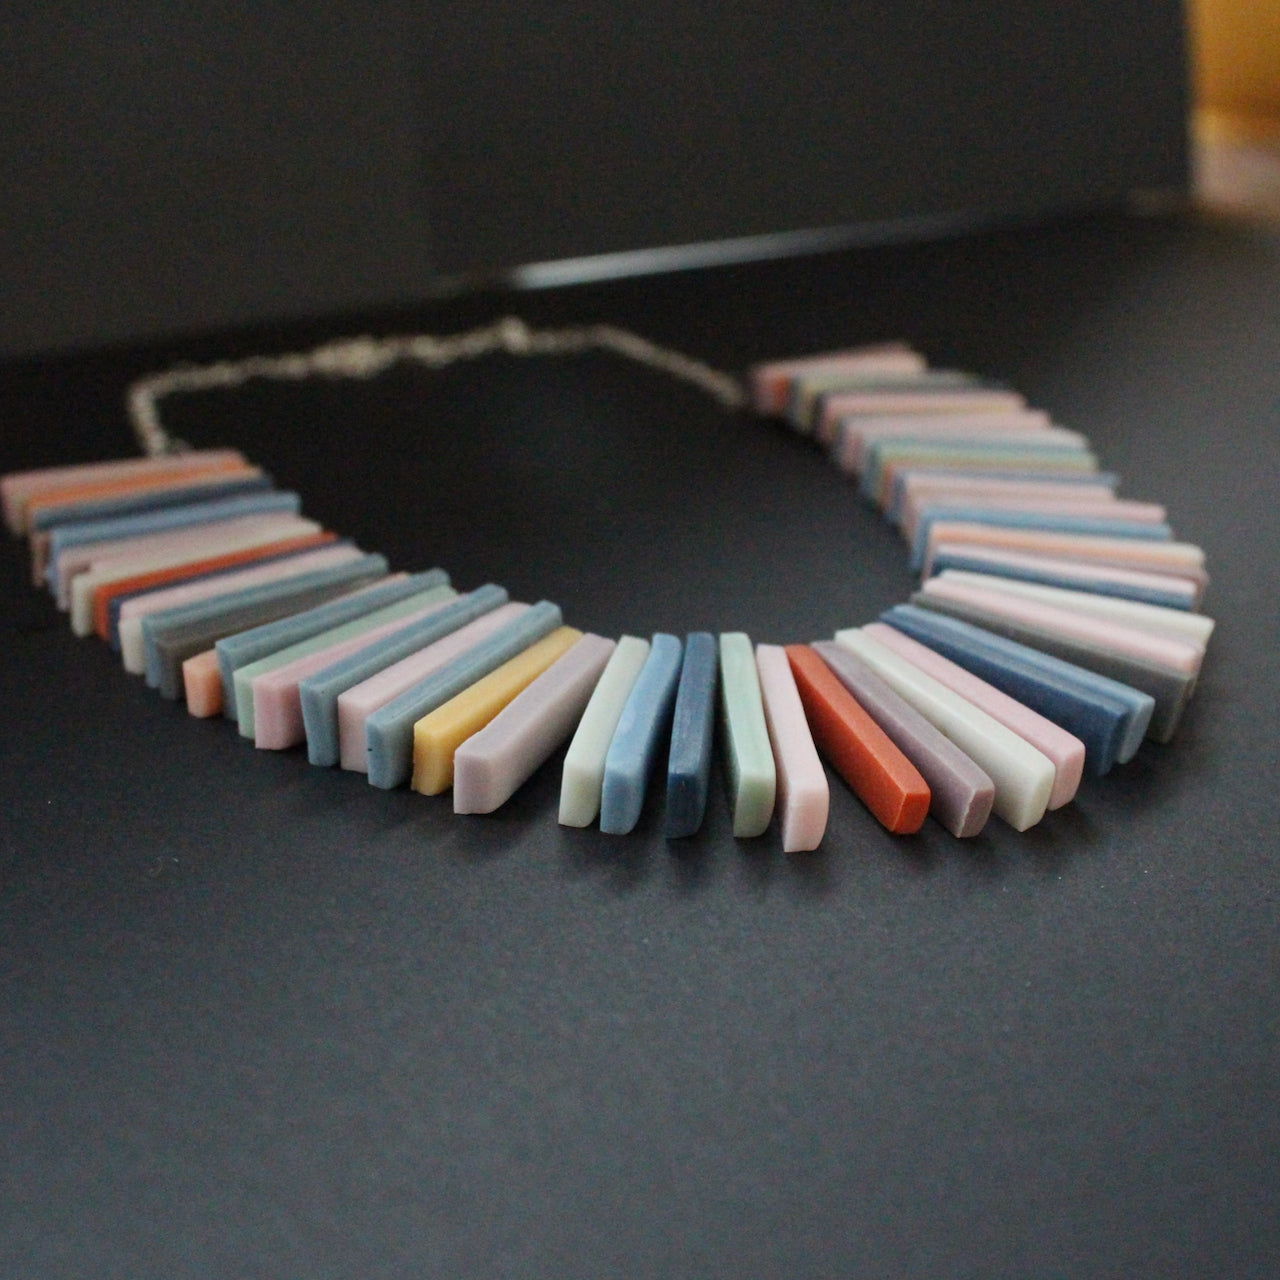 Polymer & resin clay rectangles in muted earth tones necklace by artist Clare Lloyd.